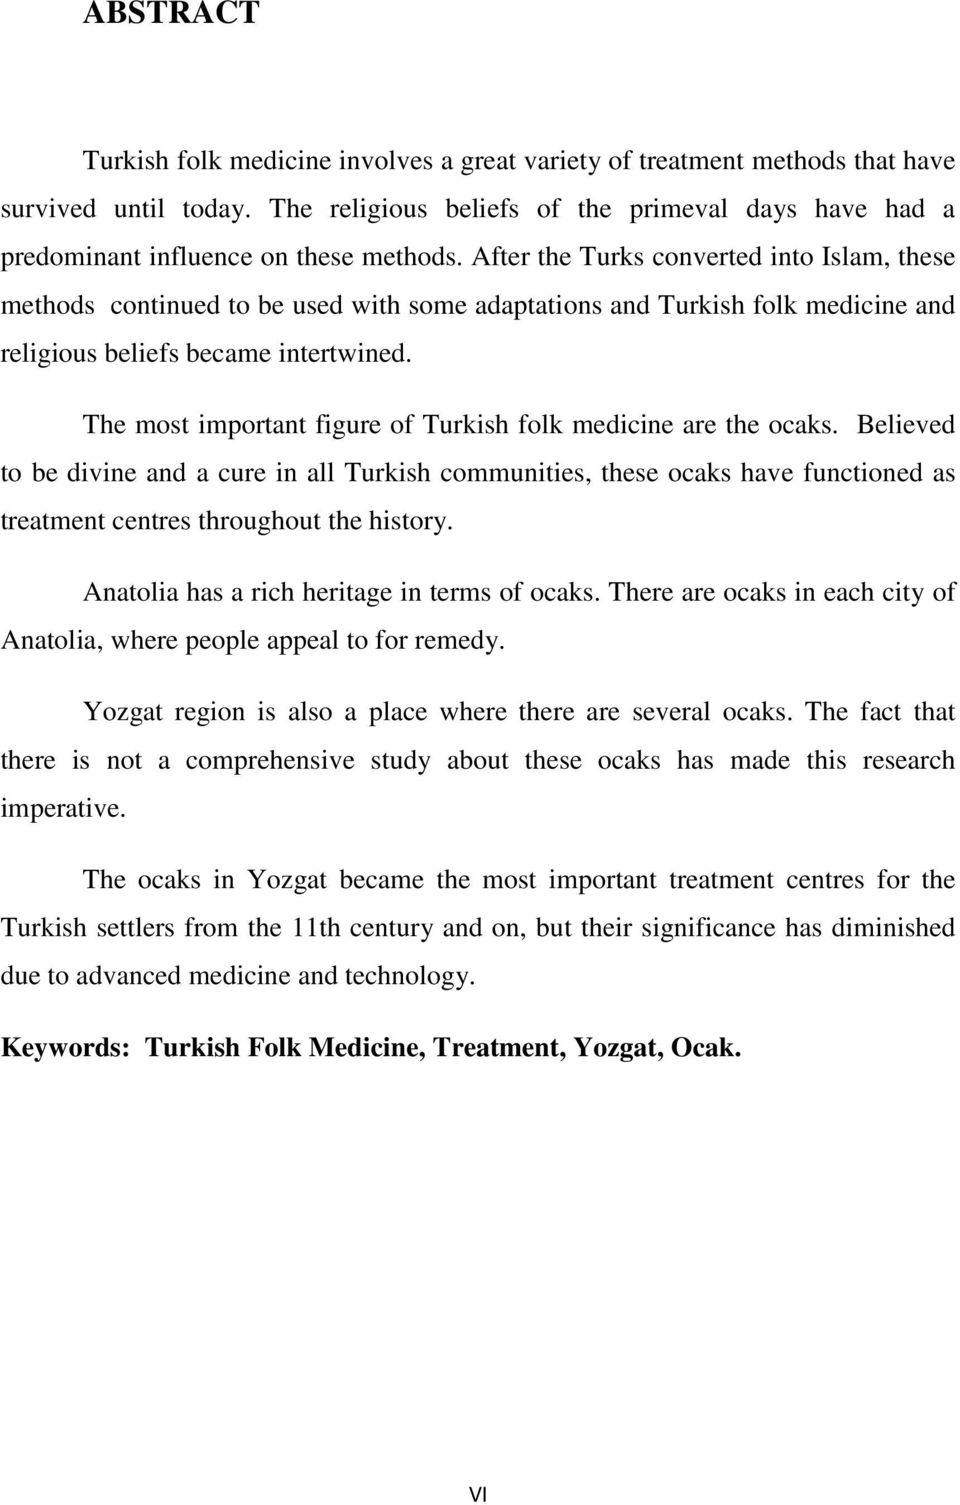 After the Turks converted into Islam, these methods continued to be used with some adaptations and Turkish folk medicine and religious beliefs became intertwined.